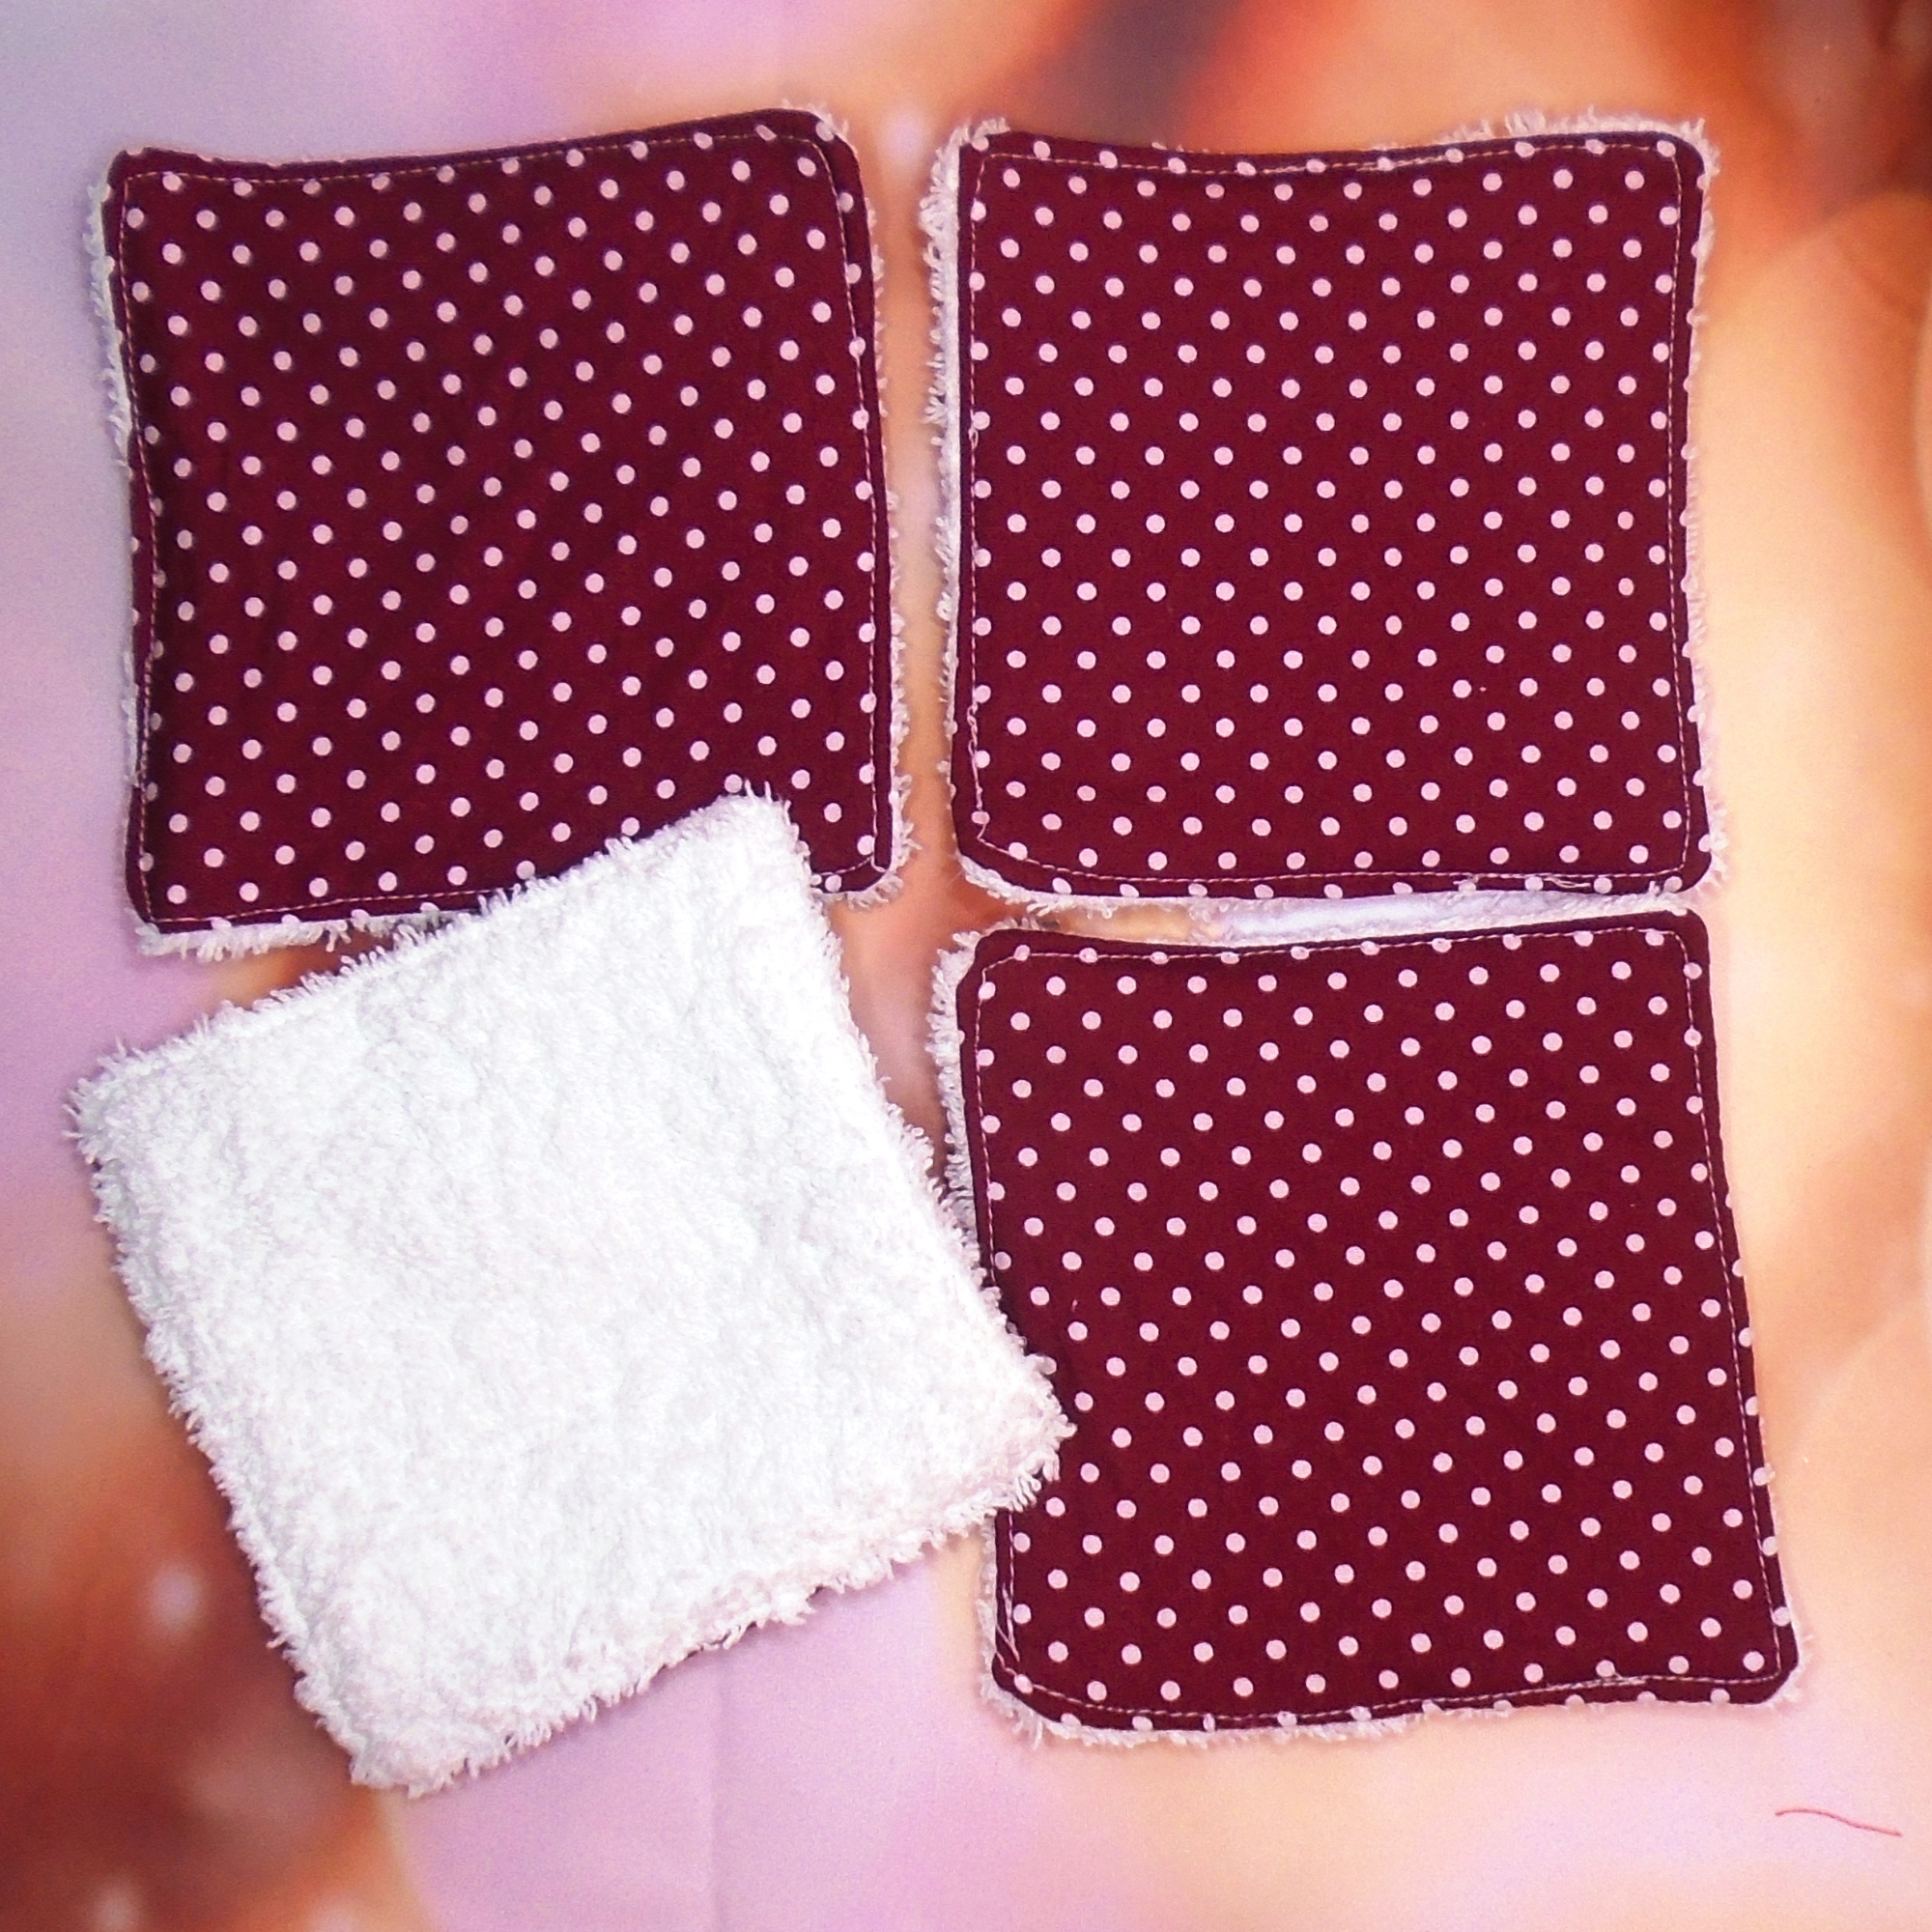 Reusable Cotton Wipes 4 Pack - Make Up - Toddler - Finger Wipes - Wine Polka Dot With White Towelling